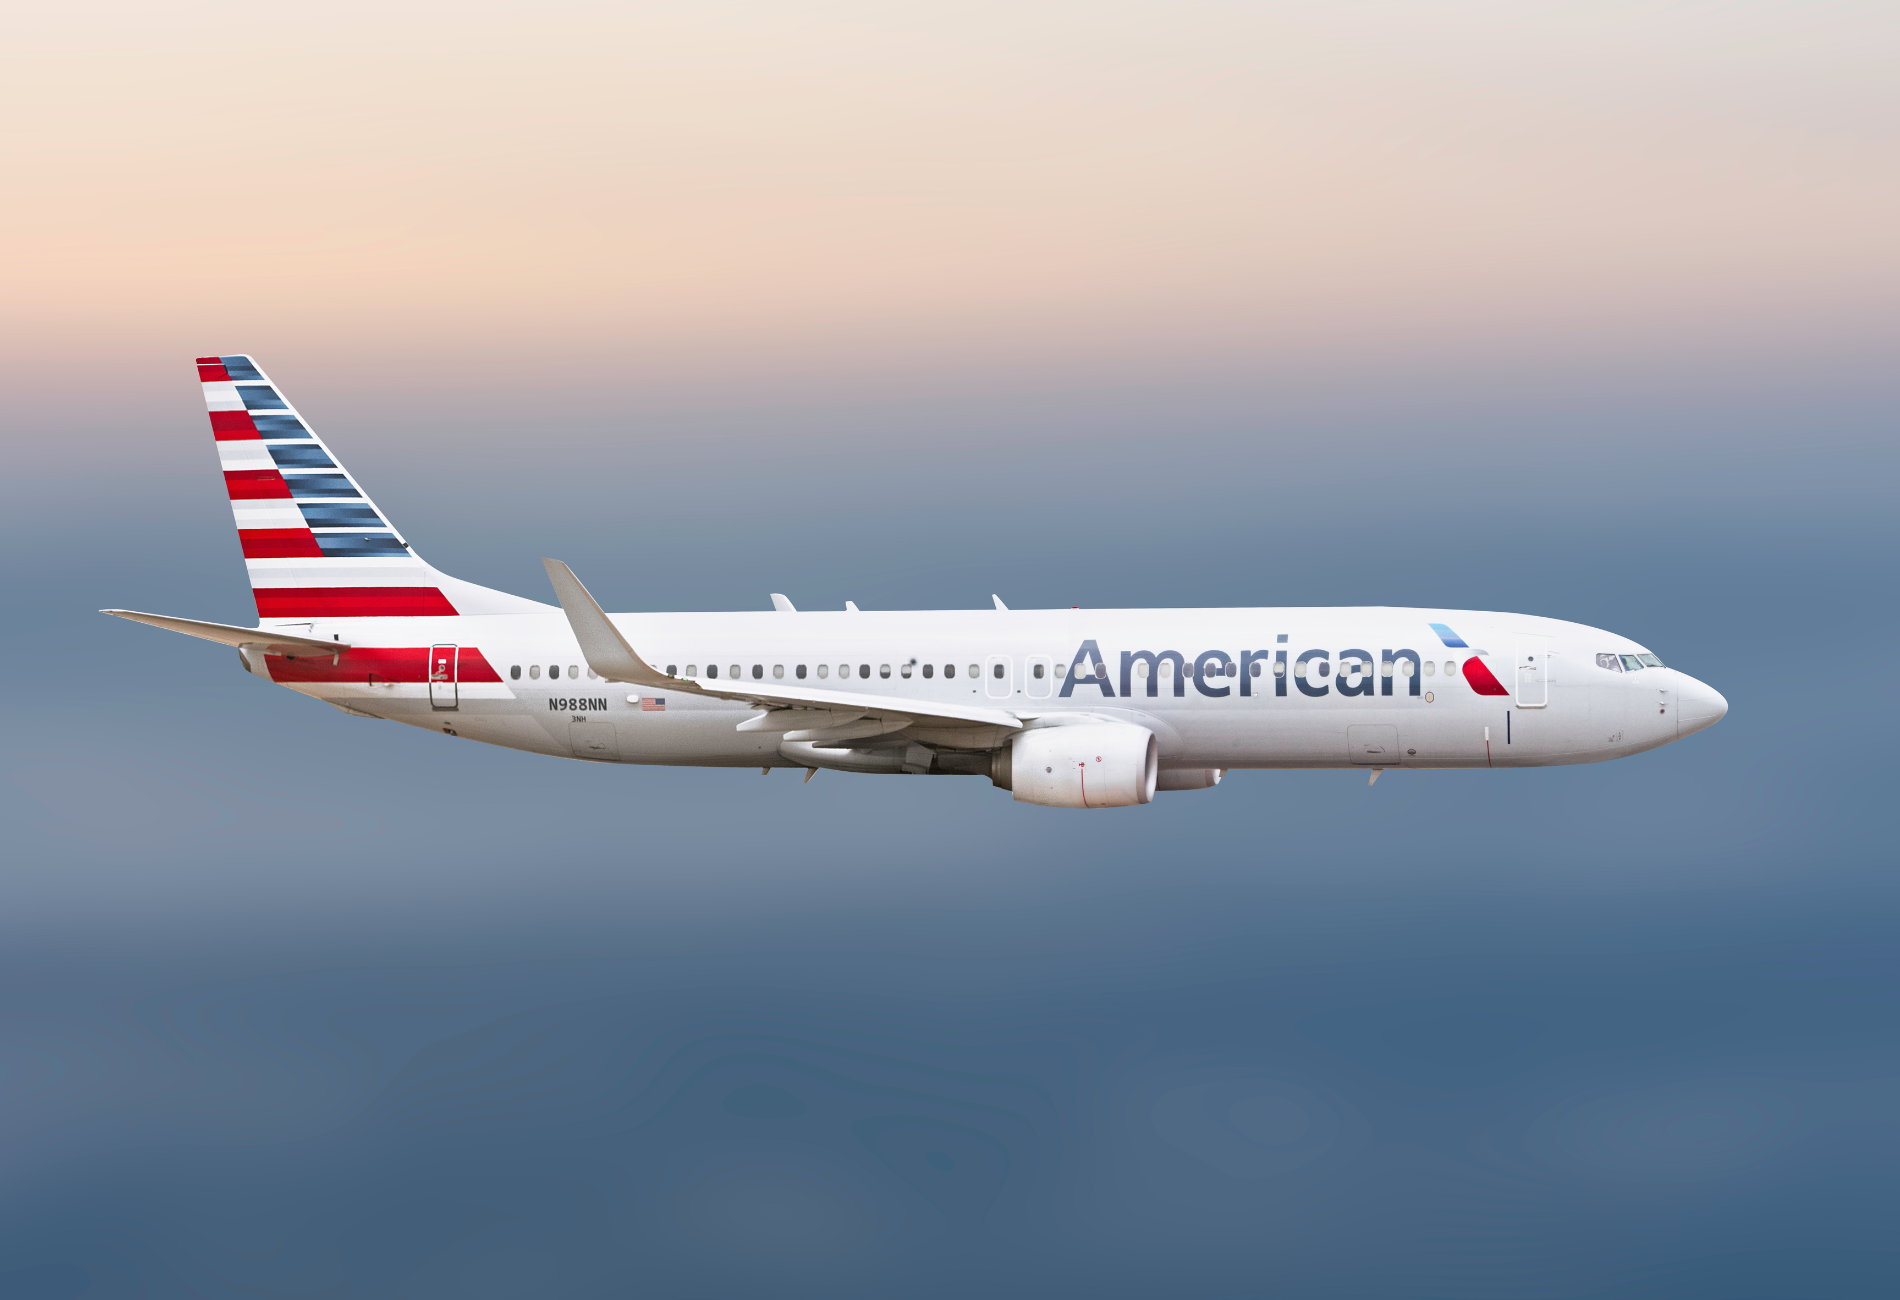 American Airlines dynamic mileage pricing